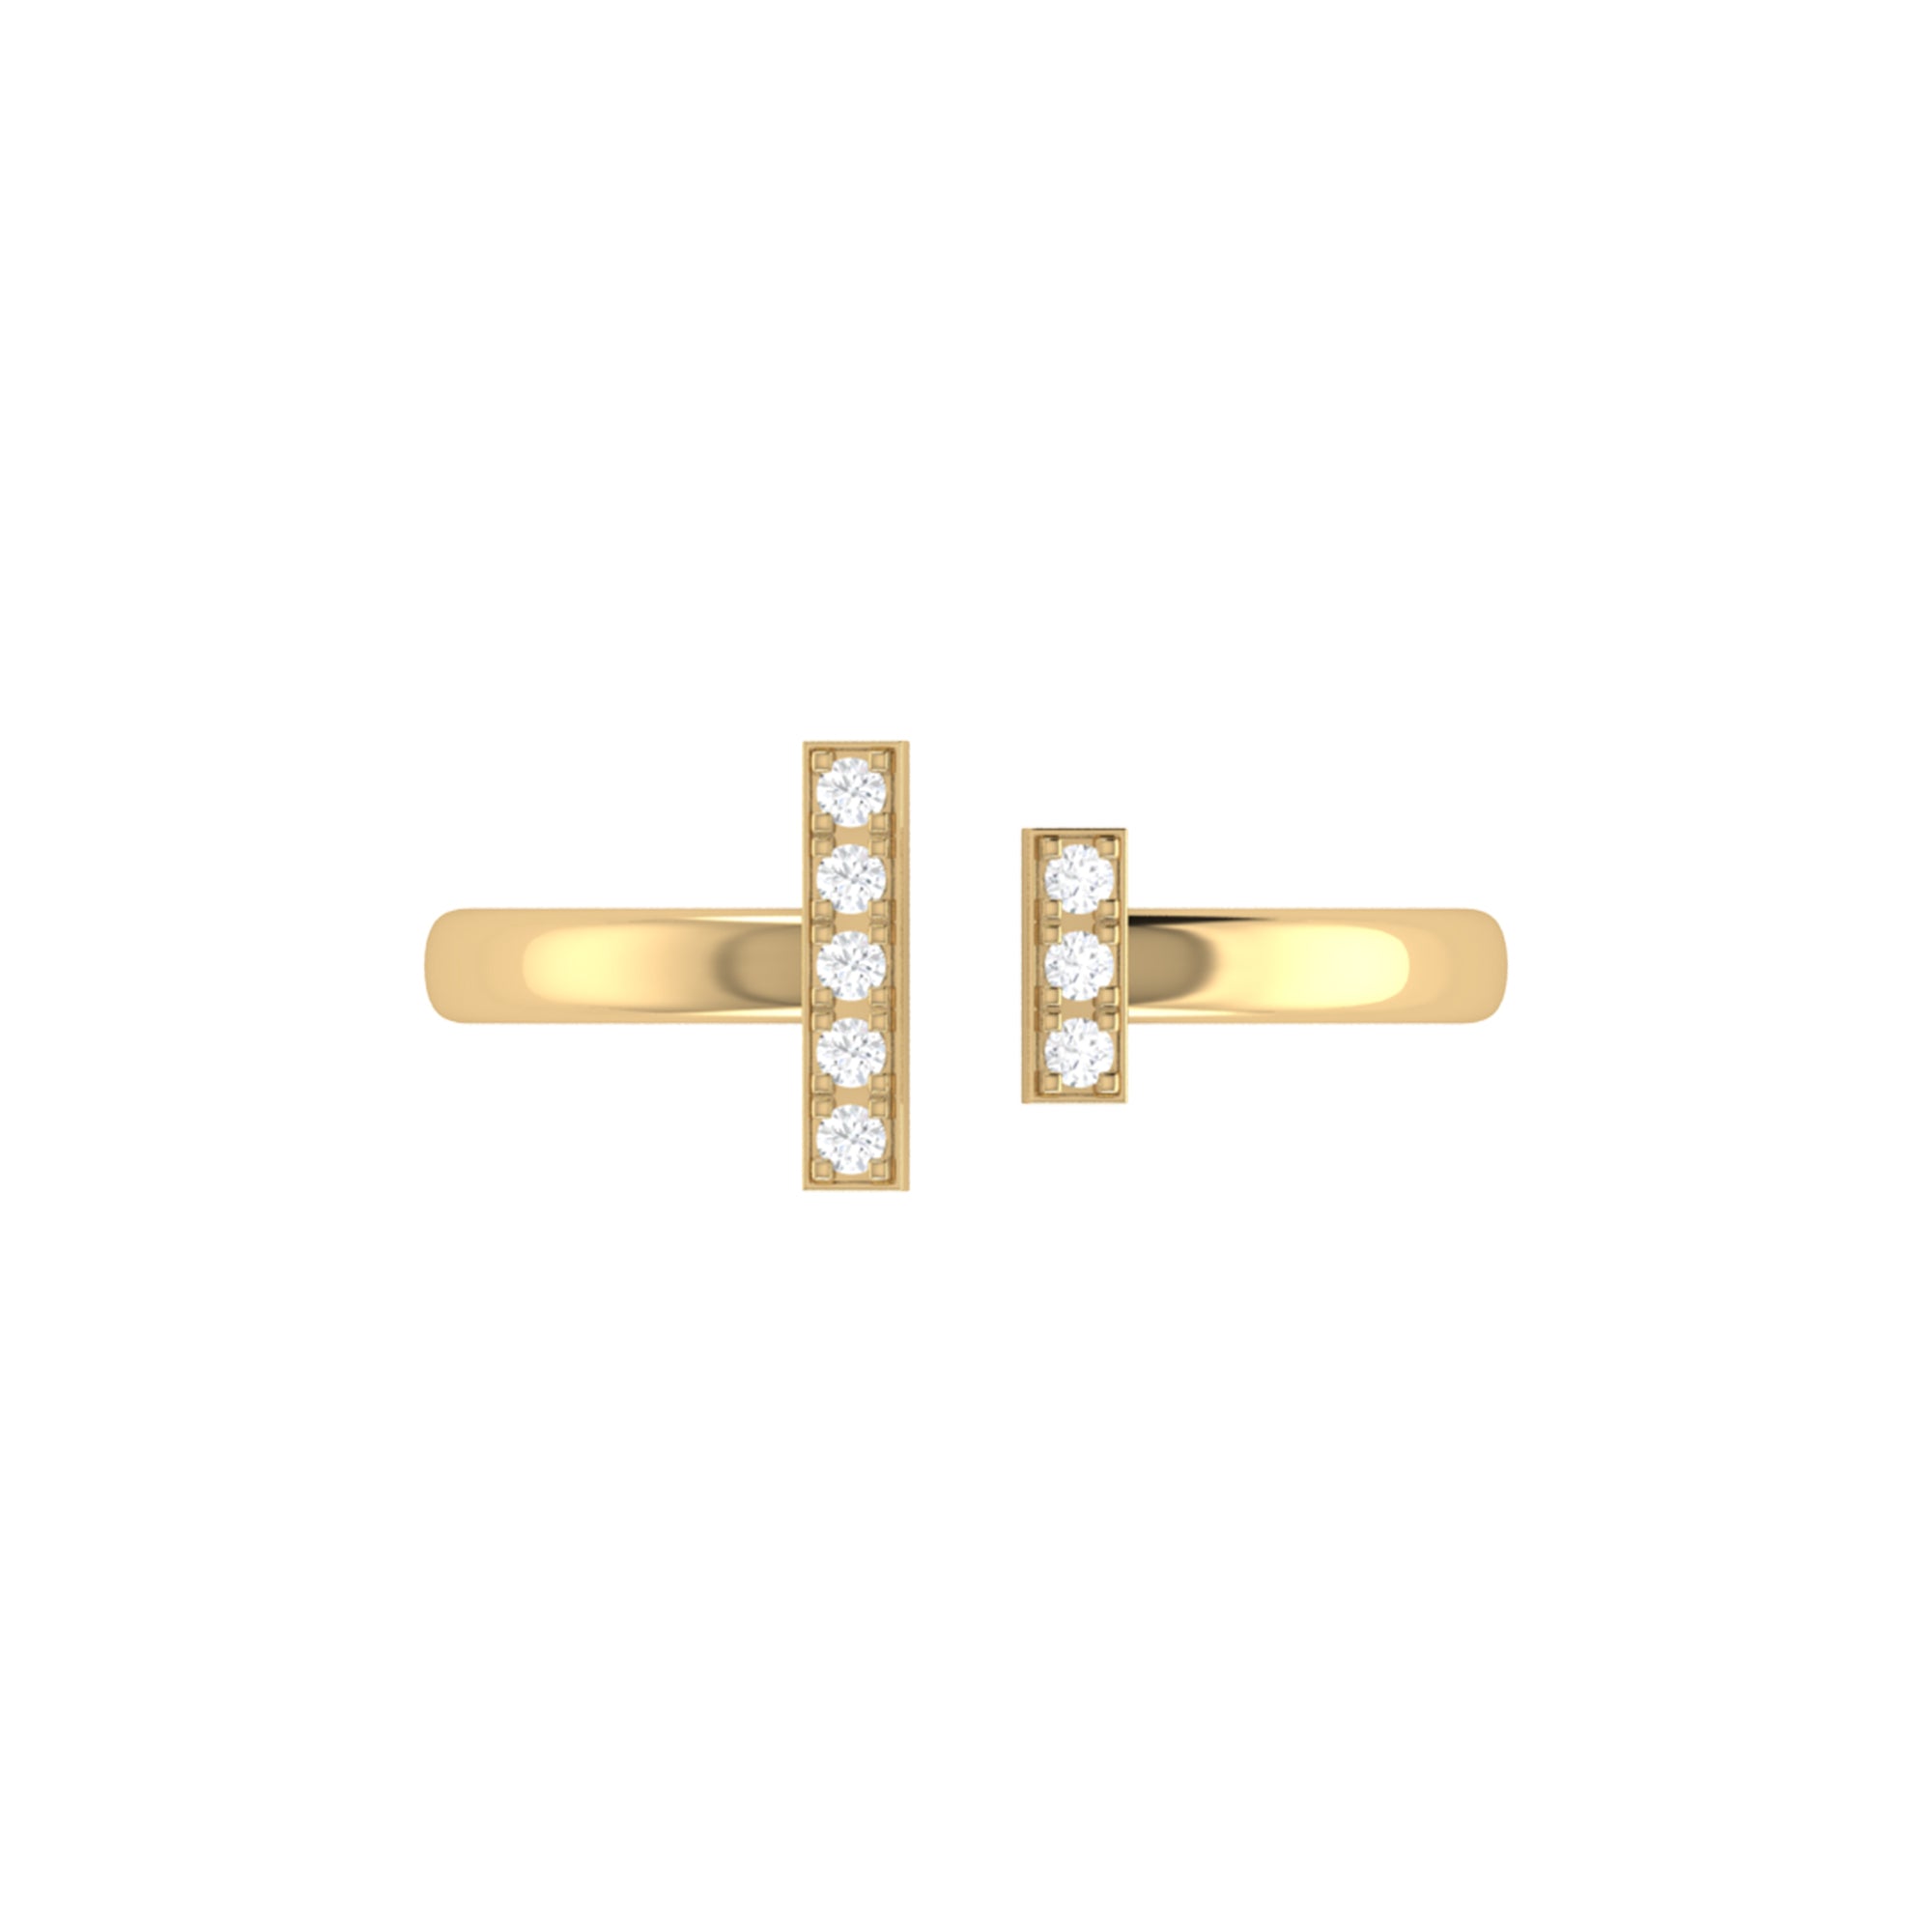 Parallel Park Double Diamond Bar Open Ring in 14K Yellow Gold Vermeil on Sterling Silver